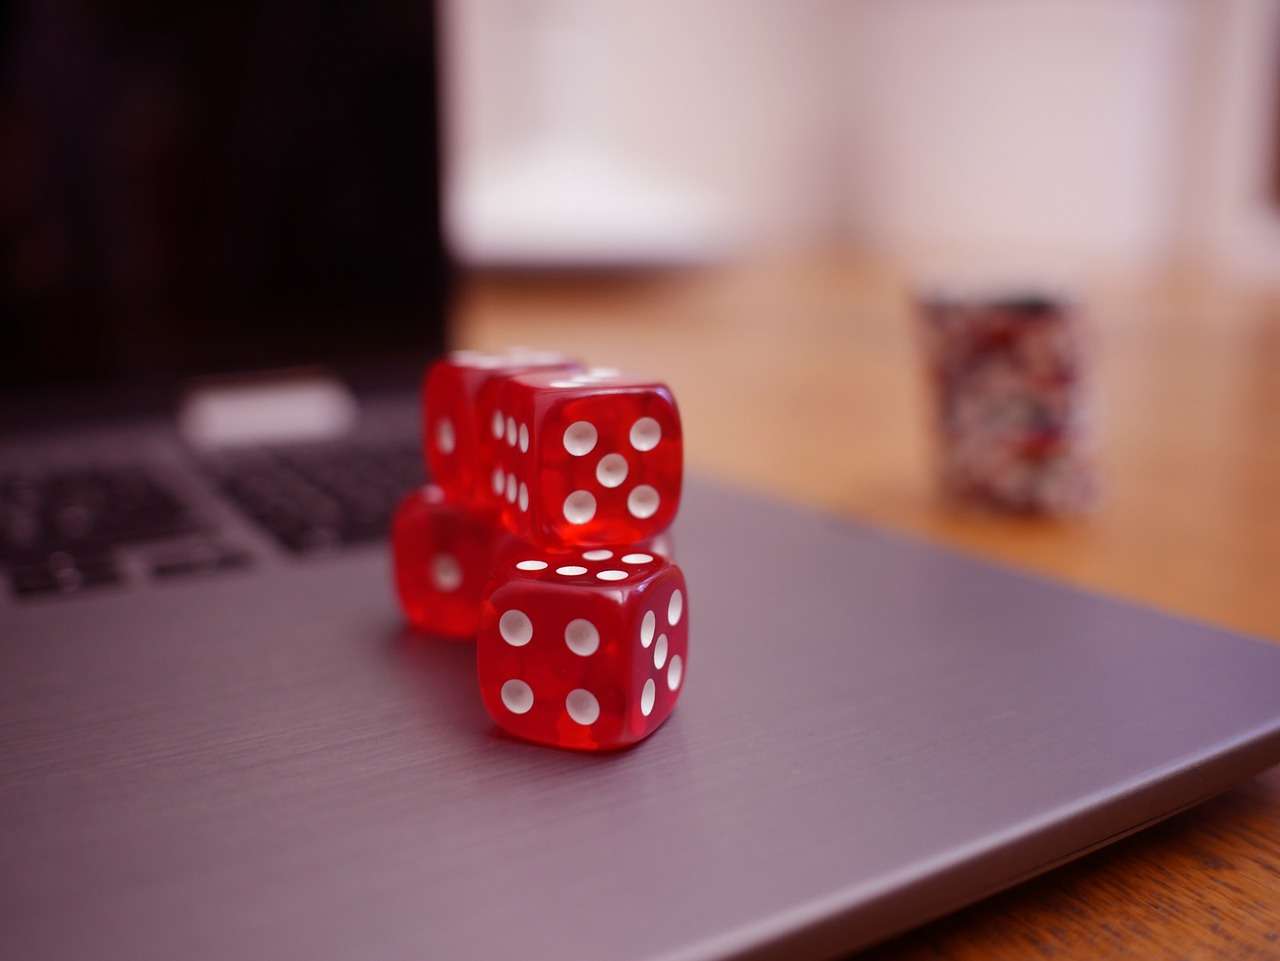 Betting on more than just horses: join the excitement in online casinos red dice on laptop